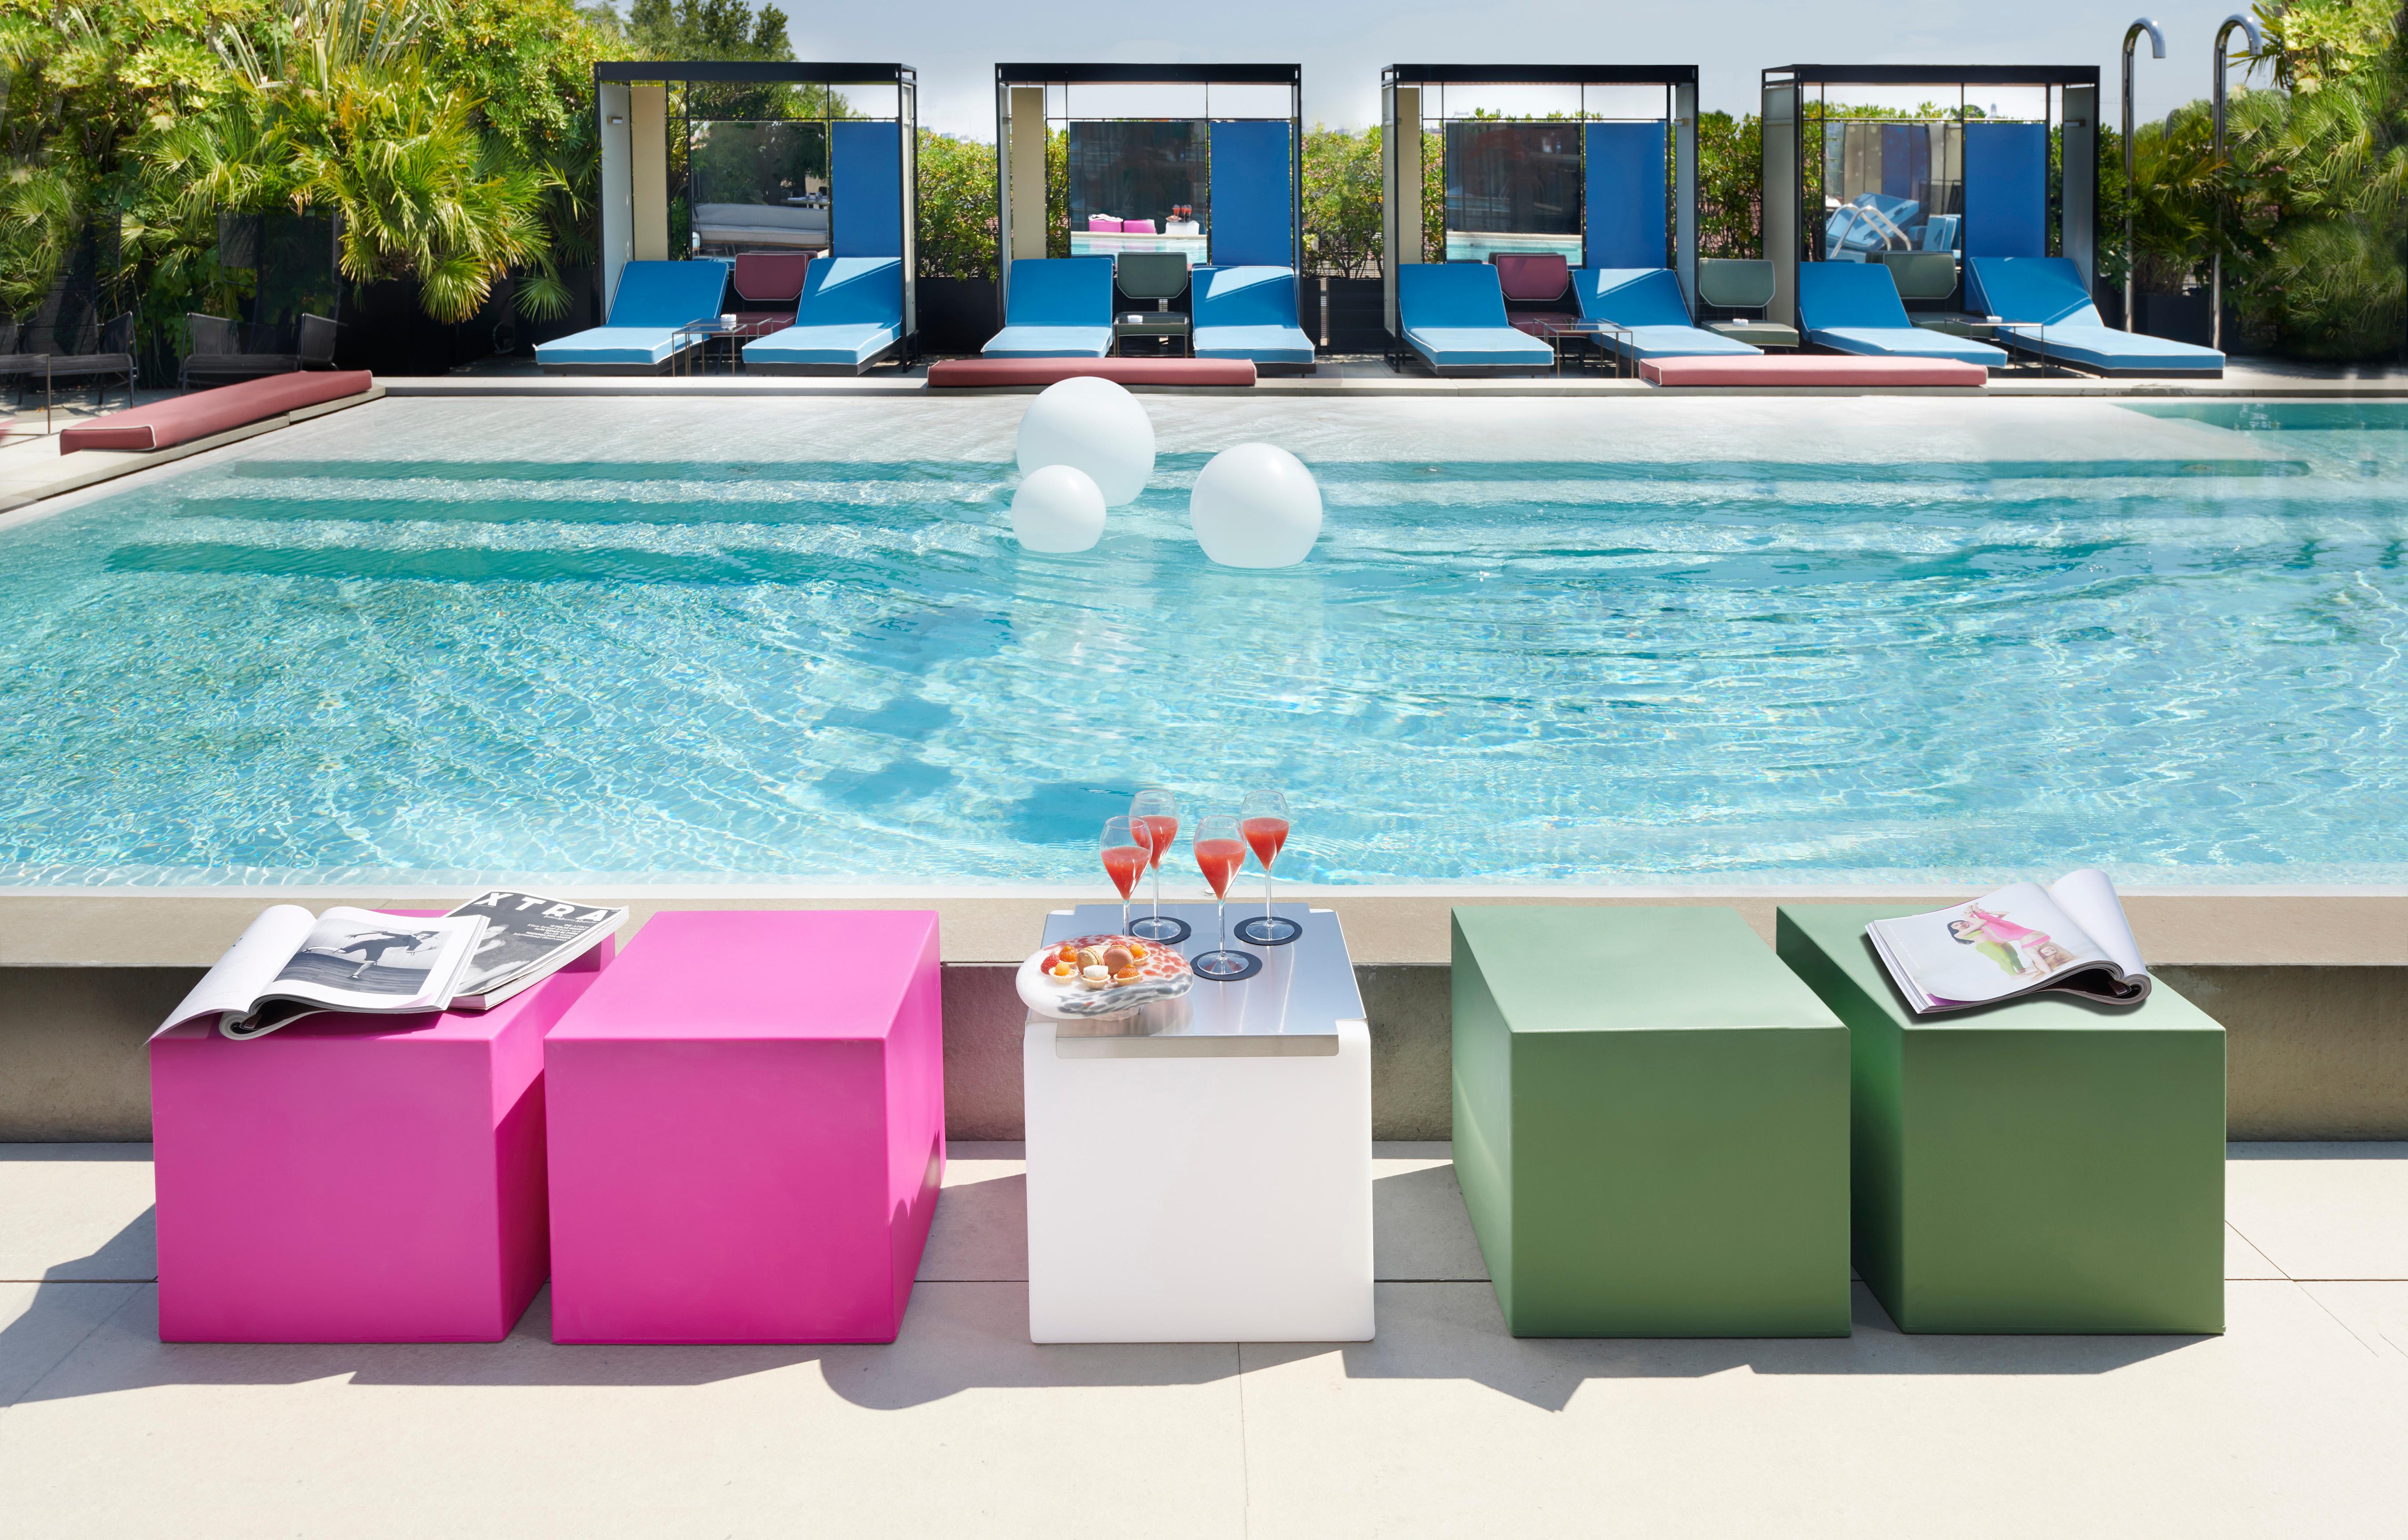 Dove Grey Cubo Pouf Stool by SLIDE Studio
Dimensions: D 43 x W 43 x H 43 cm. 
Materials: Polyethylene.
Weight: 4 kg.

Available in different color options. This product is suitable for indoor and outdoor use. Available in different versions: